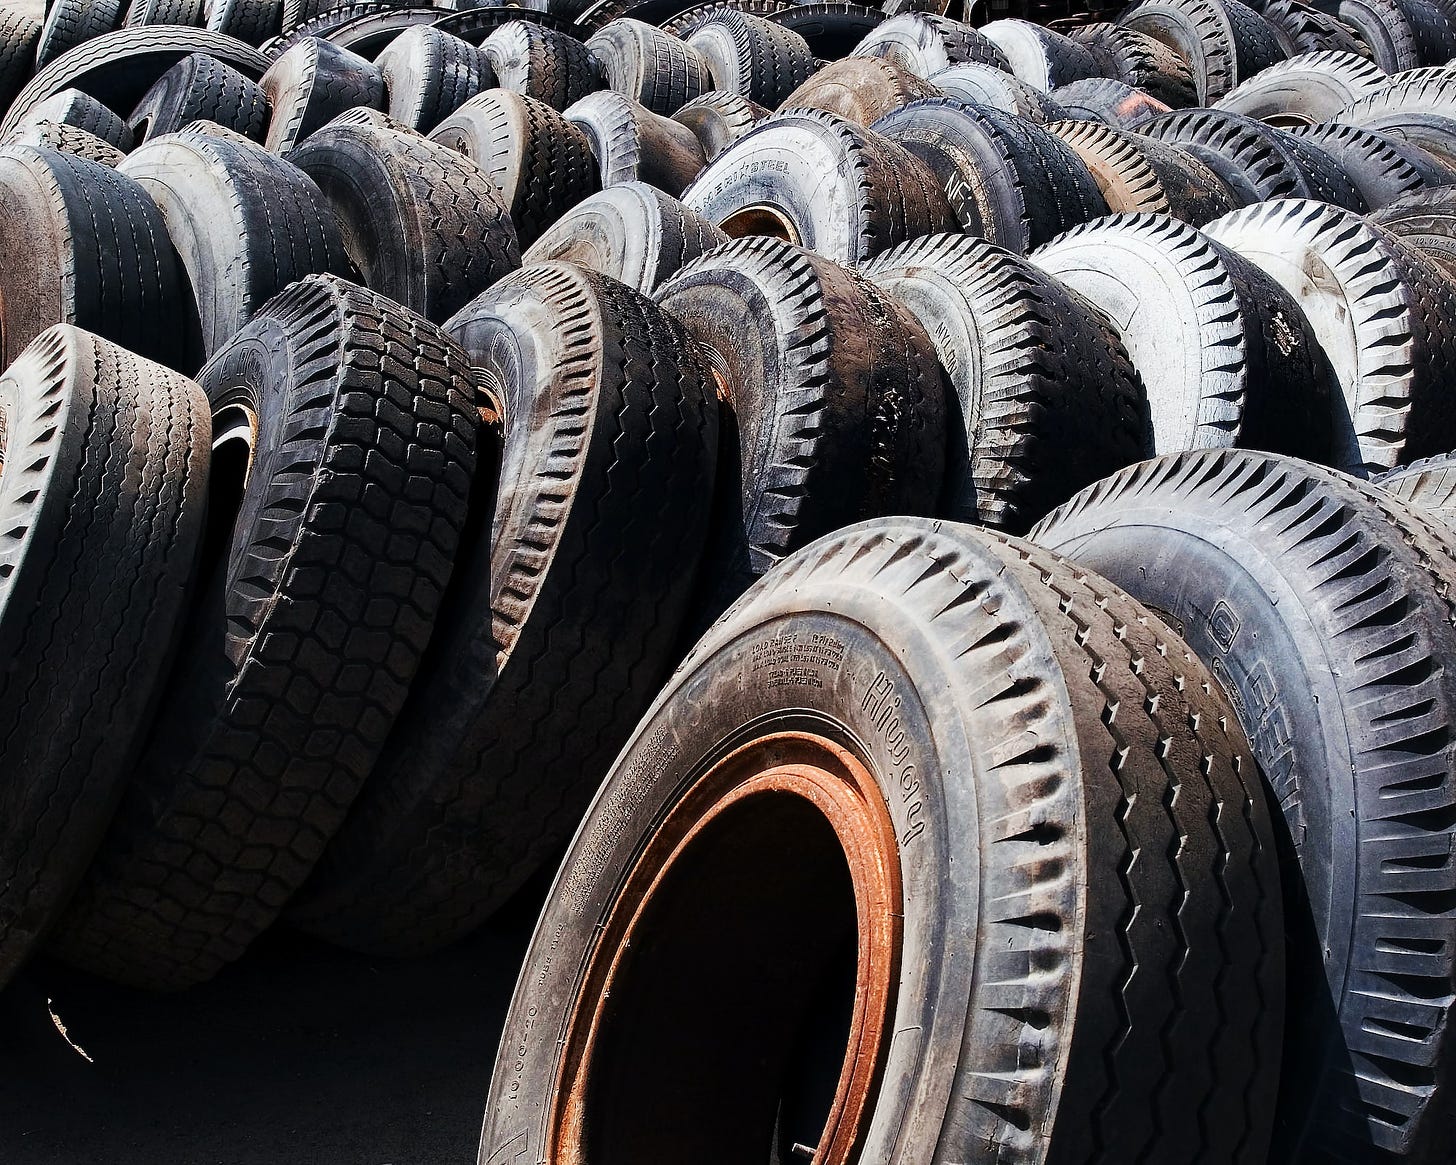 Tires awaiting recycling. Tubeless tires are better for the environment as they are seldom replaced and increase fuel efficiency, hence reducing your car's carbon footprint.